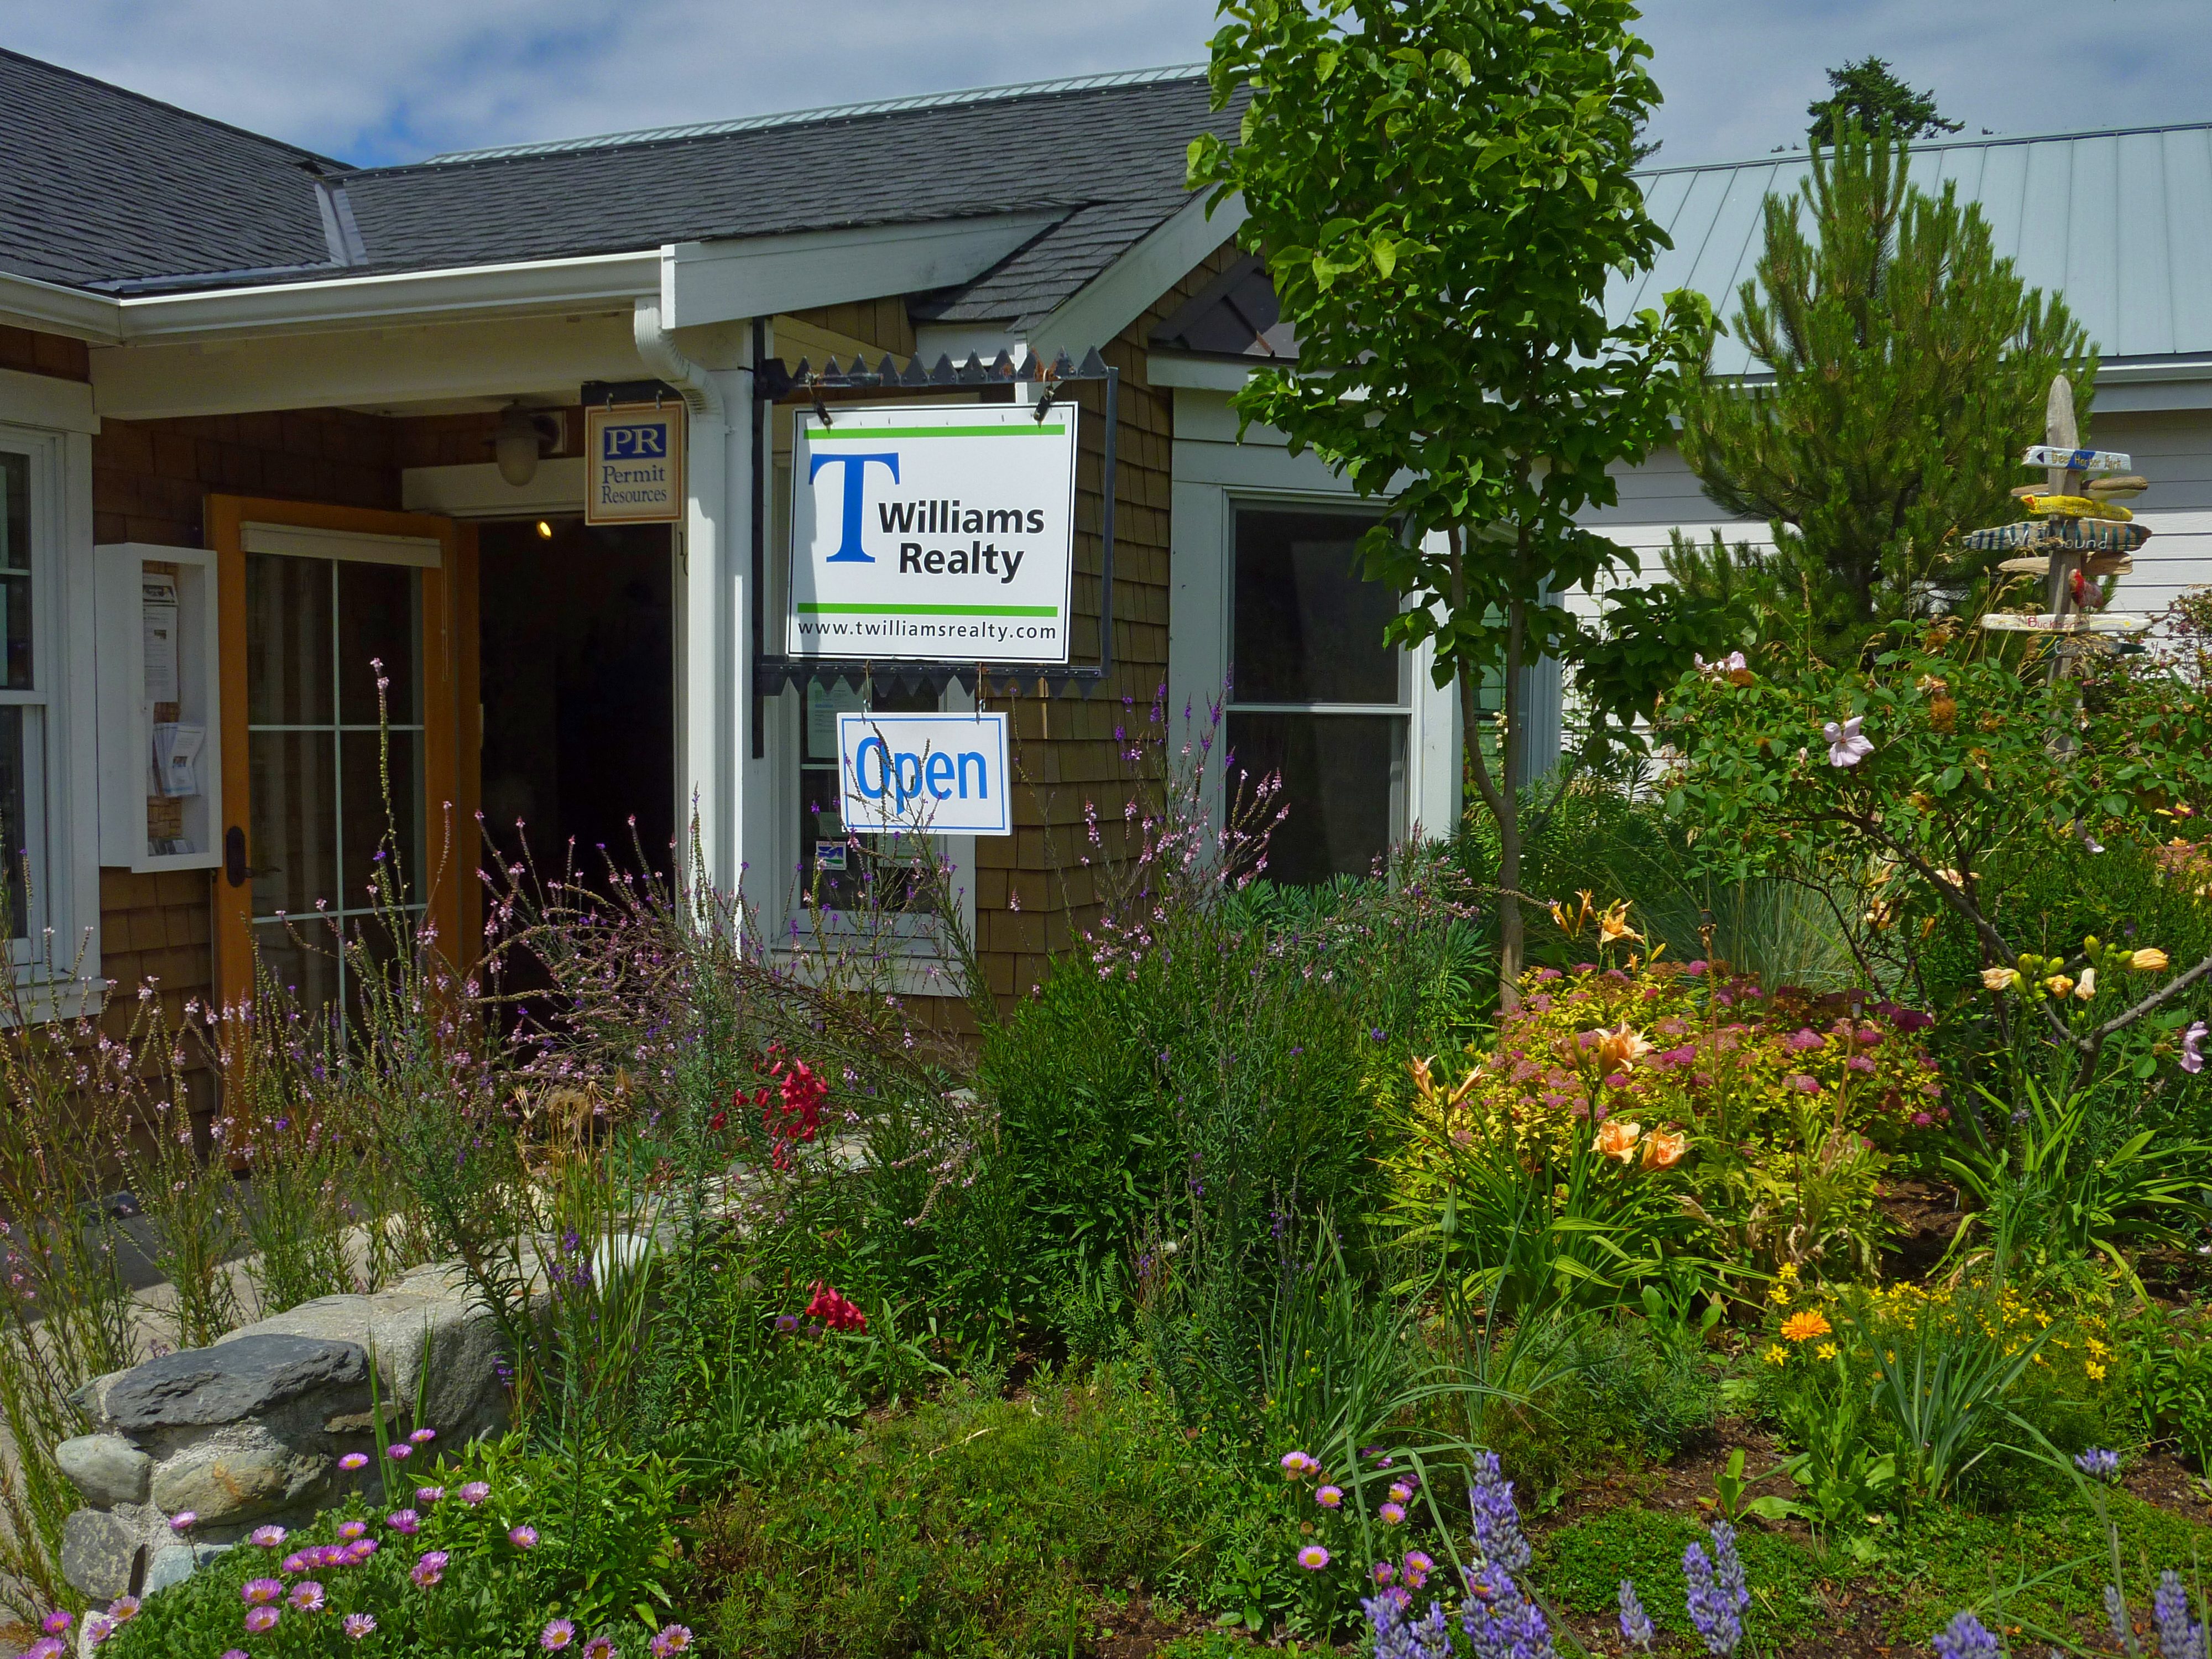 Bountiful garden at T Williams Realty in Eastsound, Orcas Island